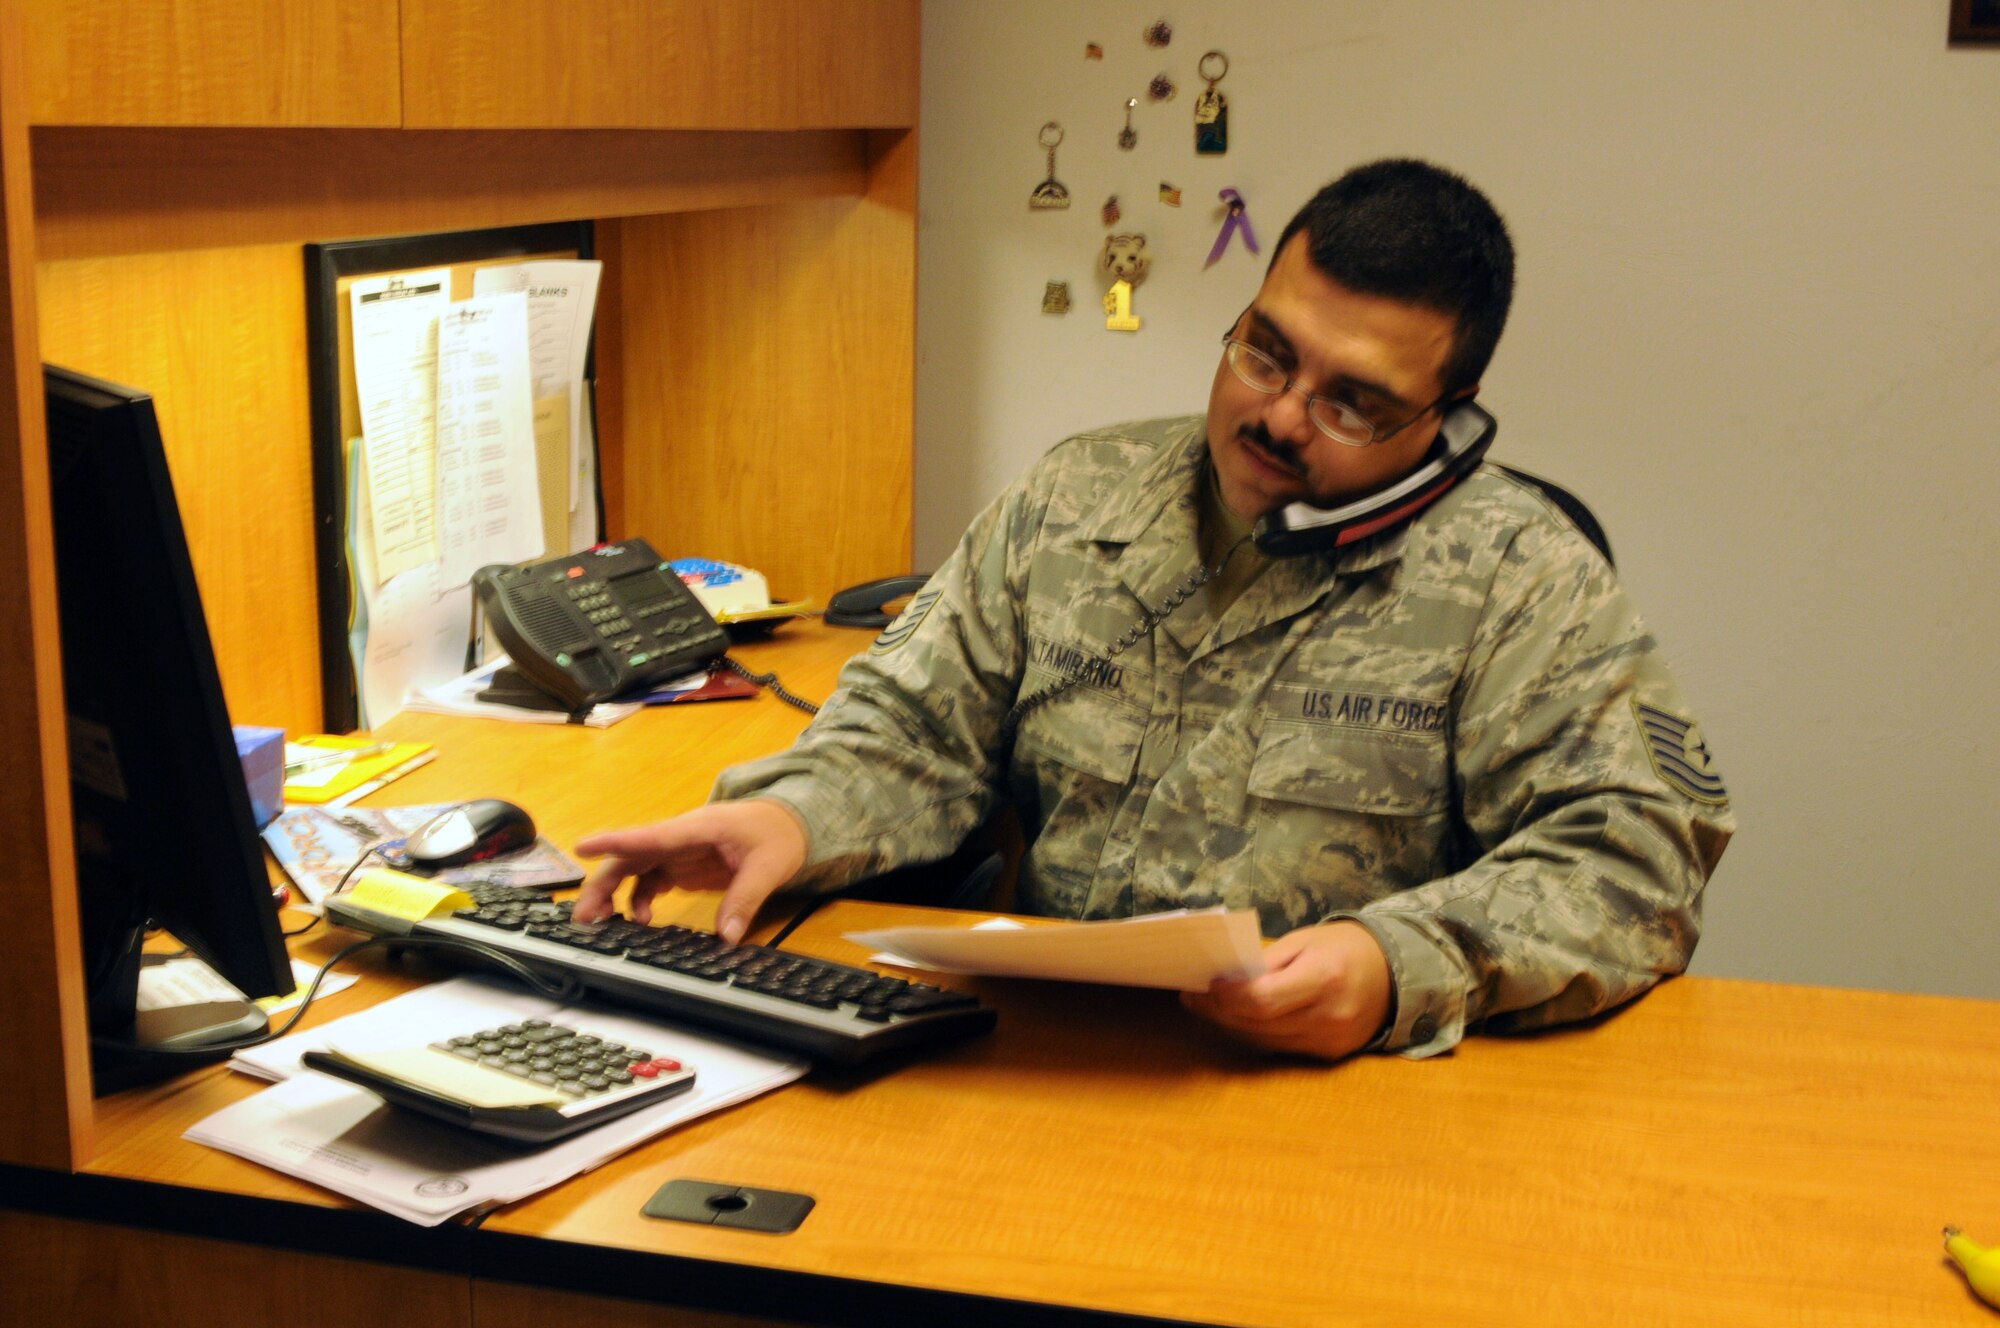 Tech. Sgt. Martin Altamirano, budget technician, works with Tech. Sgt. Jorge Sosa, resource advisor for logistics readiness squadron, over the phone Aug. 27 to balance LRS’s government purchase card (GPC) account. Balancing more than 15 GPC accounts for the 162nd Fighter Wing is only one small aspect of what it takes to balance the entire wing budget. (Air Force photo by Staff Sgt. Jordan Jones)